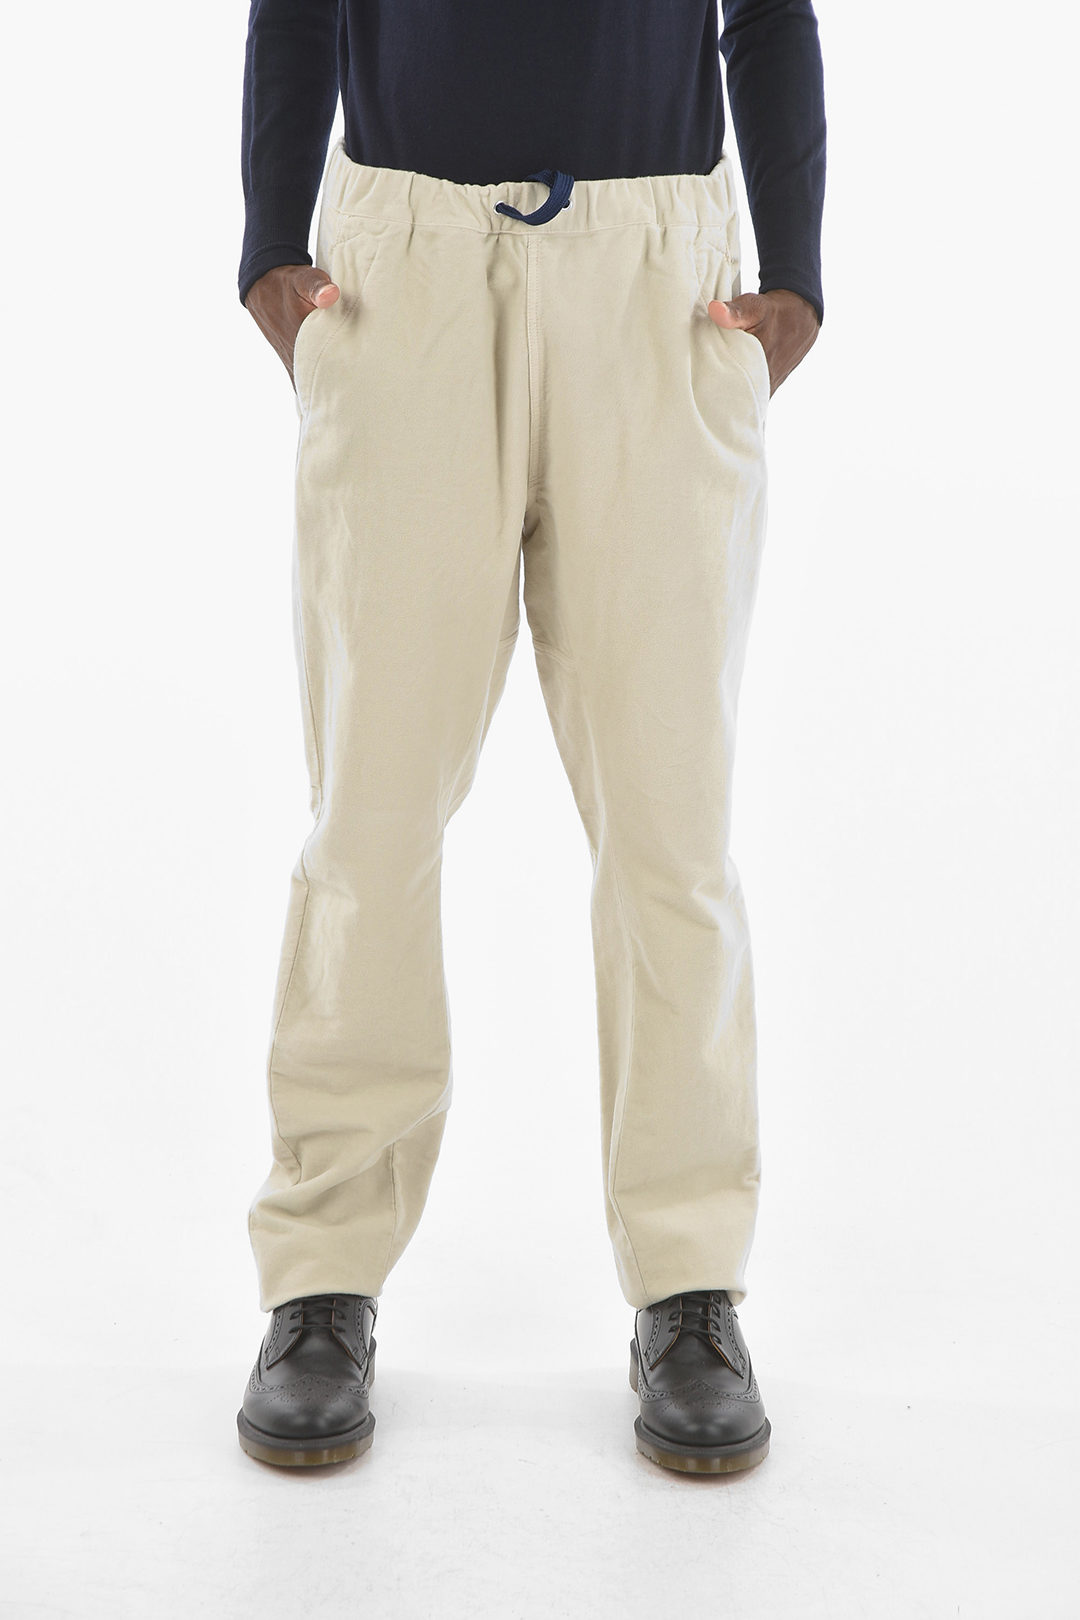 Discover more than 143 pants with back flap pockets best - in.eteachers